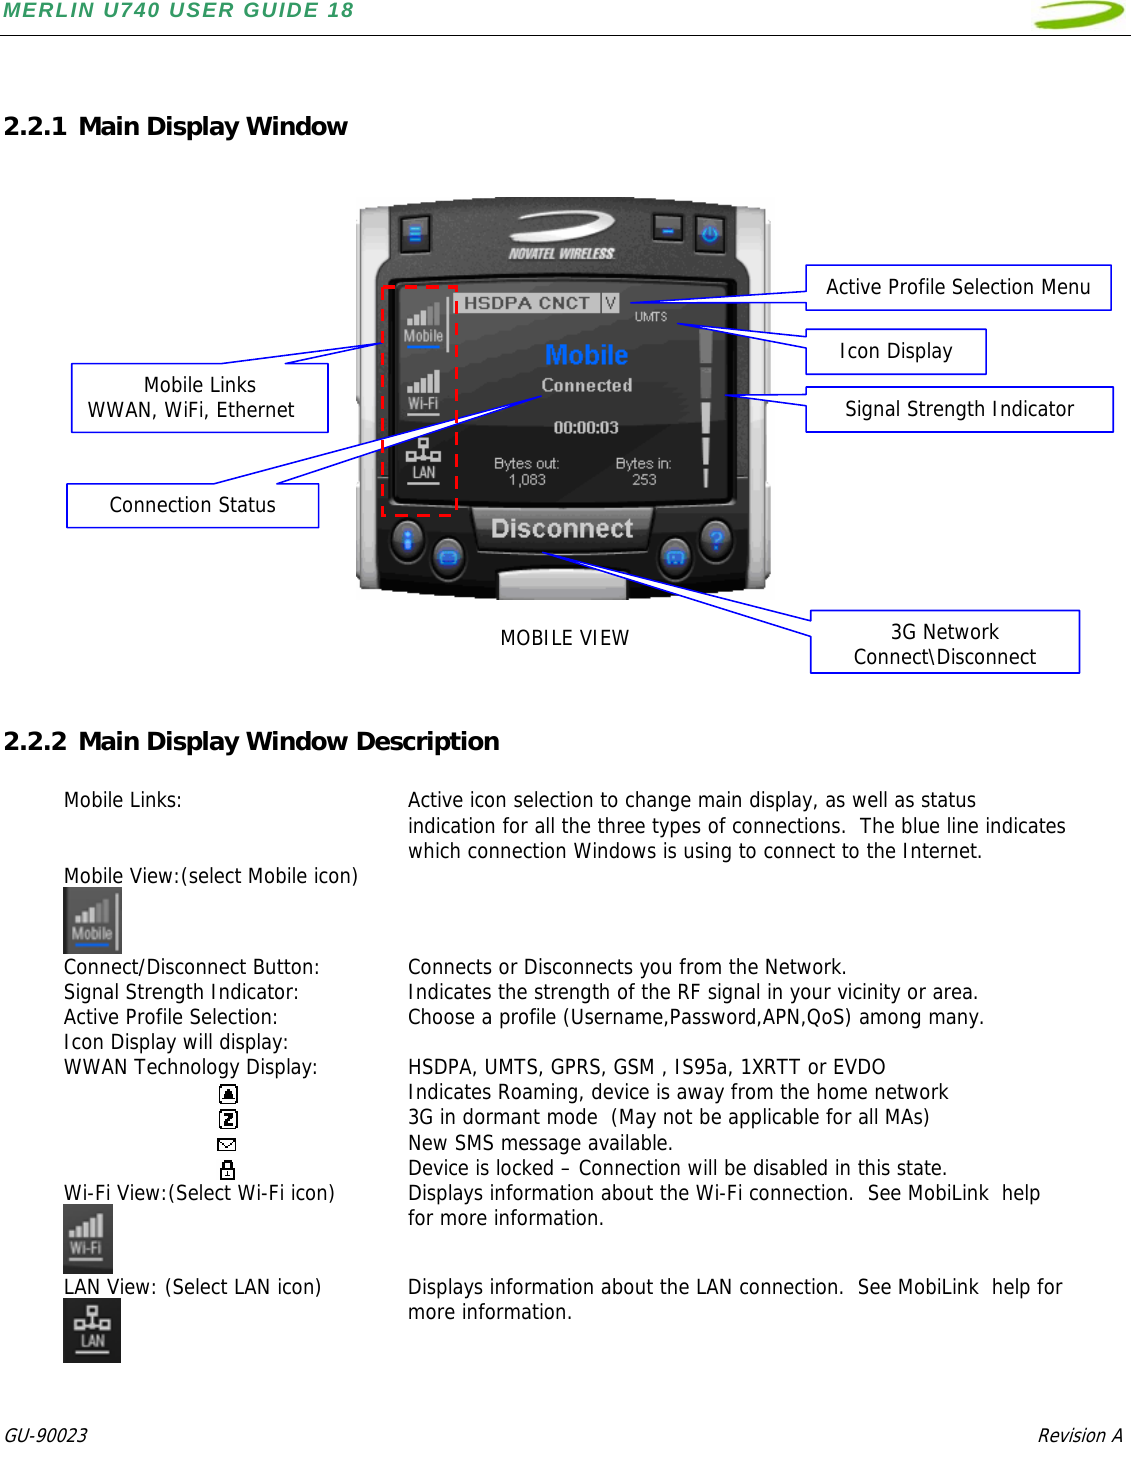 MERLIN U740 USER GUIDE 18  GU-90023            Revision A    2.2.1 Main Display Window     MOBILE VIEW   2.2.2 Main Display Window Description  Mobile Links:  Active icon selection to change main display, as well as status indication for all the three types of connections.  The blue line indicates which connection Windows is using to connect to the Internet. Mobile View:(select Mobile icon)   Connect/Disconnect Button:  Connects or Disconnects you from the Network. Signal Strength Indicator:  Indicates the strength of the RF signal in your vicinity or area. Active Profile Selection:  Choose a profile (Username,Password,APN,QoS) among many.   Icon Display will display:   WWAN Technology Display:  HSDPA, UMTS, GPRS, GSM , IS95a, 1XRTT or EVDO   Indicates Roaming, device is away from the home network   3G in dormant mode  (May not be applicable for all MAs)     New SMS message available.   Device is locked – Connection will be disabled in this state. Wi-Fi View:(Select Wi-Fi icon)  Displays information about the Wi-Fi connection.  See MobiLink  help for more information. LAN View: (Select LAN icon)  Displays information about the LAN connection.  See MobiLink  help for more information.  Mobile Links WWAN, WiFi, Ethernet 3G Network Connect\DisconnectSignal Strength IndicatorActive Profile Selection MenuIcon DisplayConnection Status 